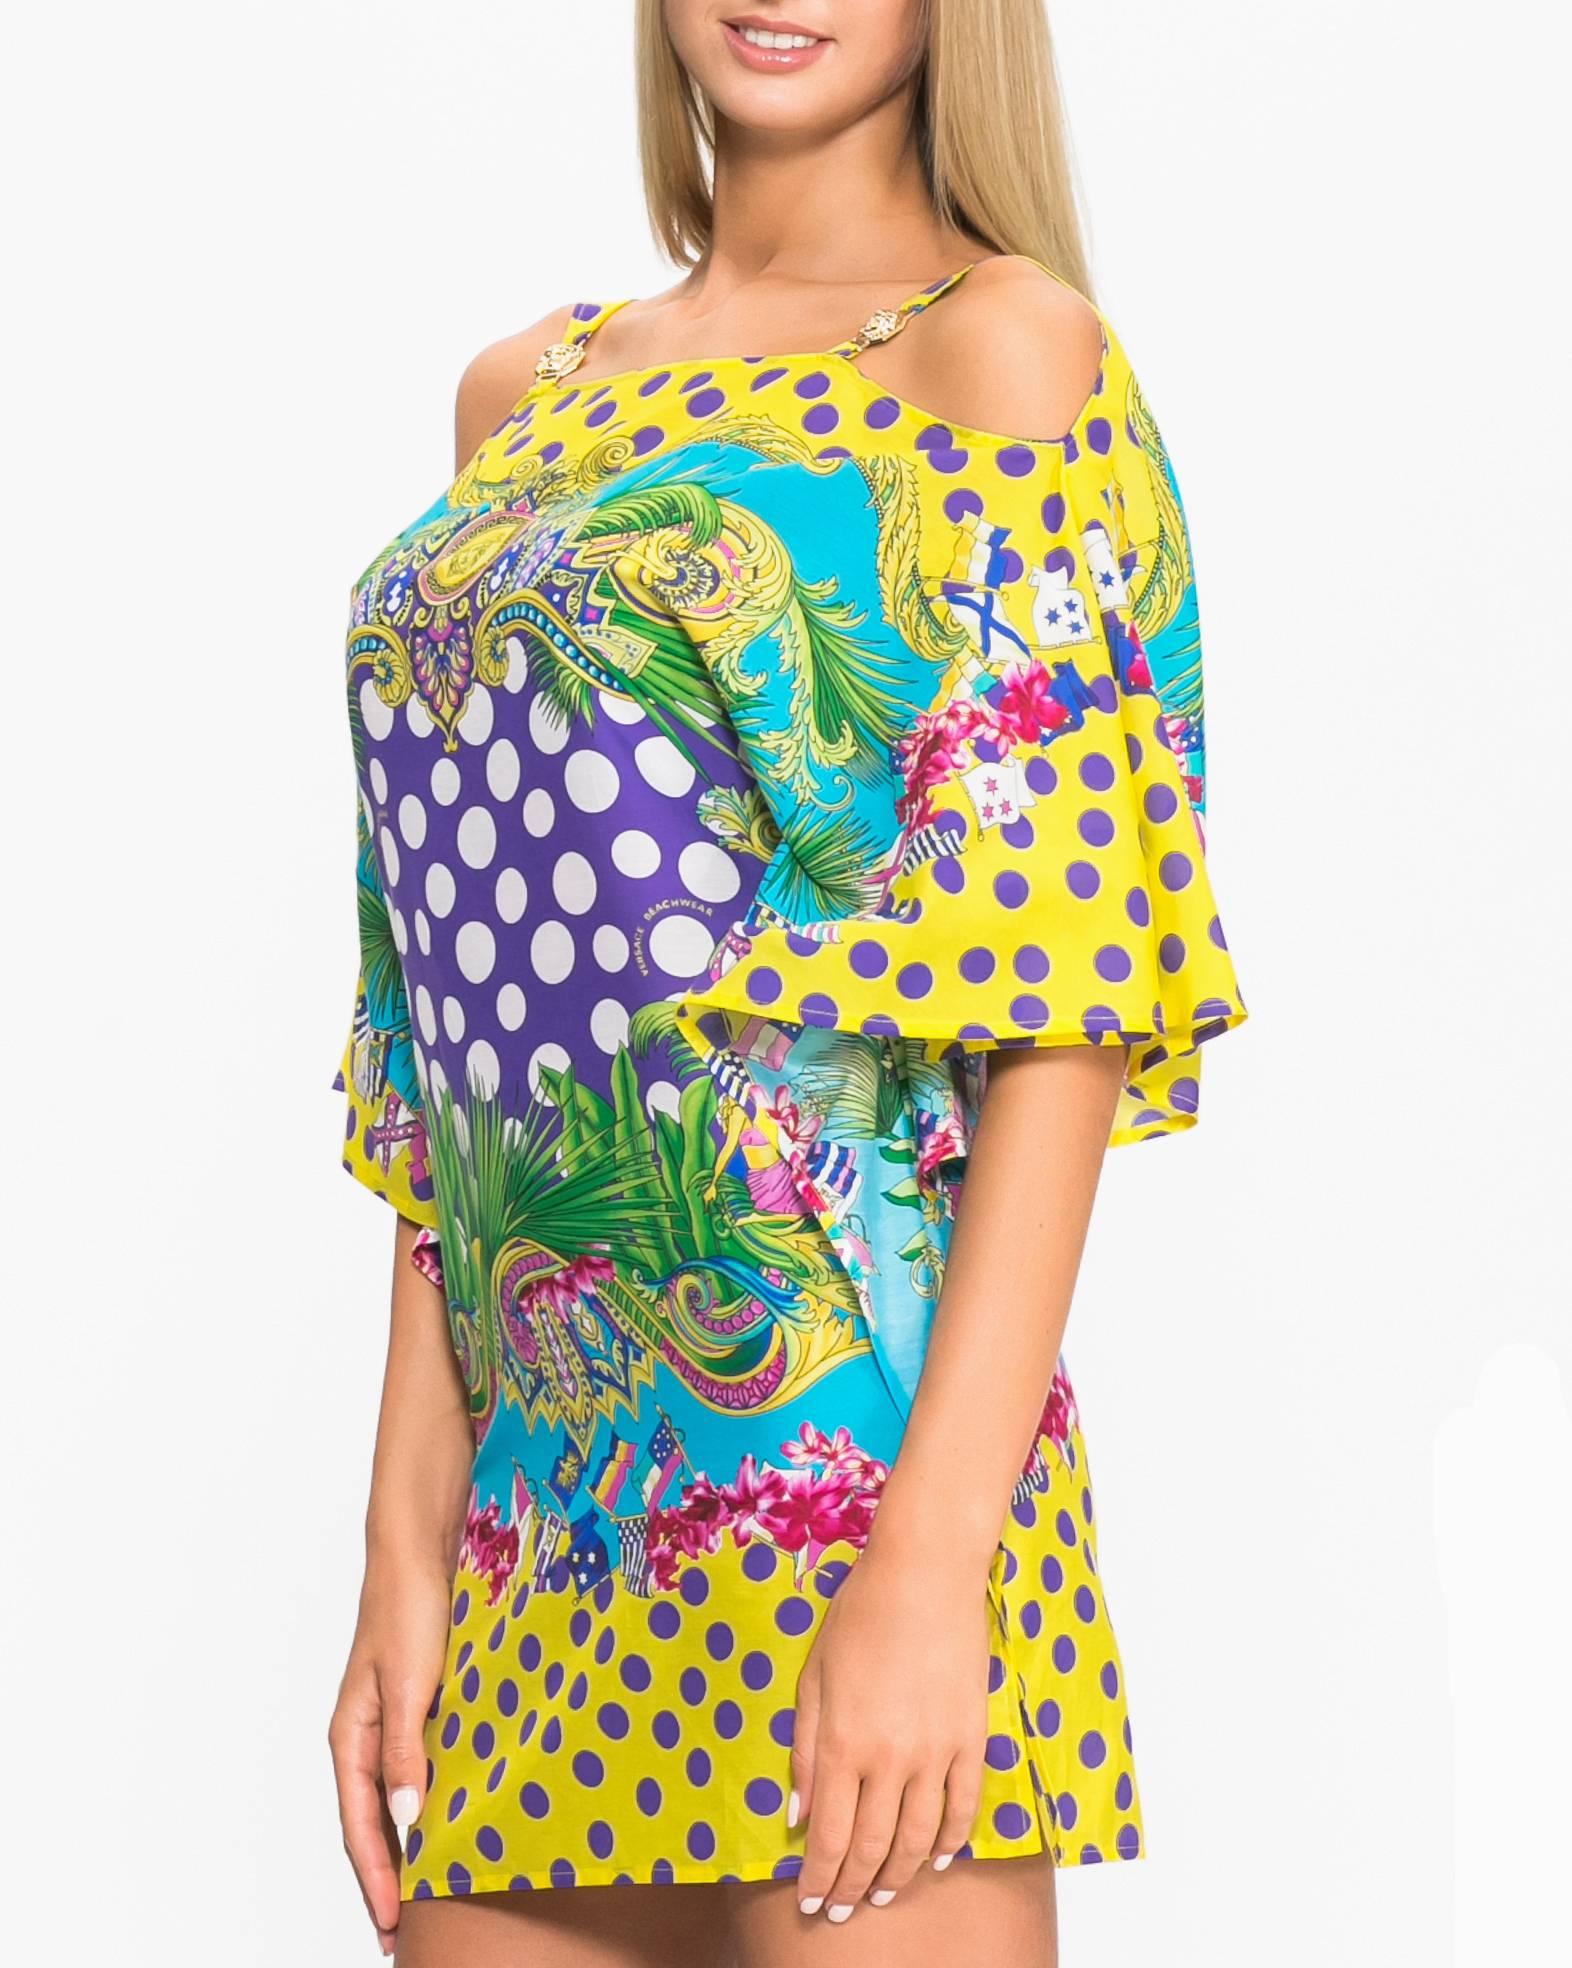 VERSACE 

Beach Dress

56% Cotton, 44% Silk

Finished with gold Medusa hardware         

Made in Italy
 
IT size 38 - US S/M (oversized fit)

Brand new, with tags.

  